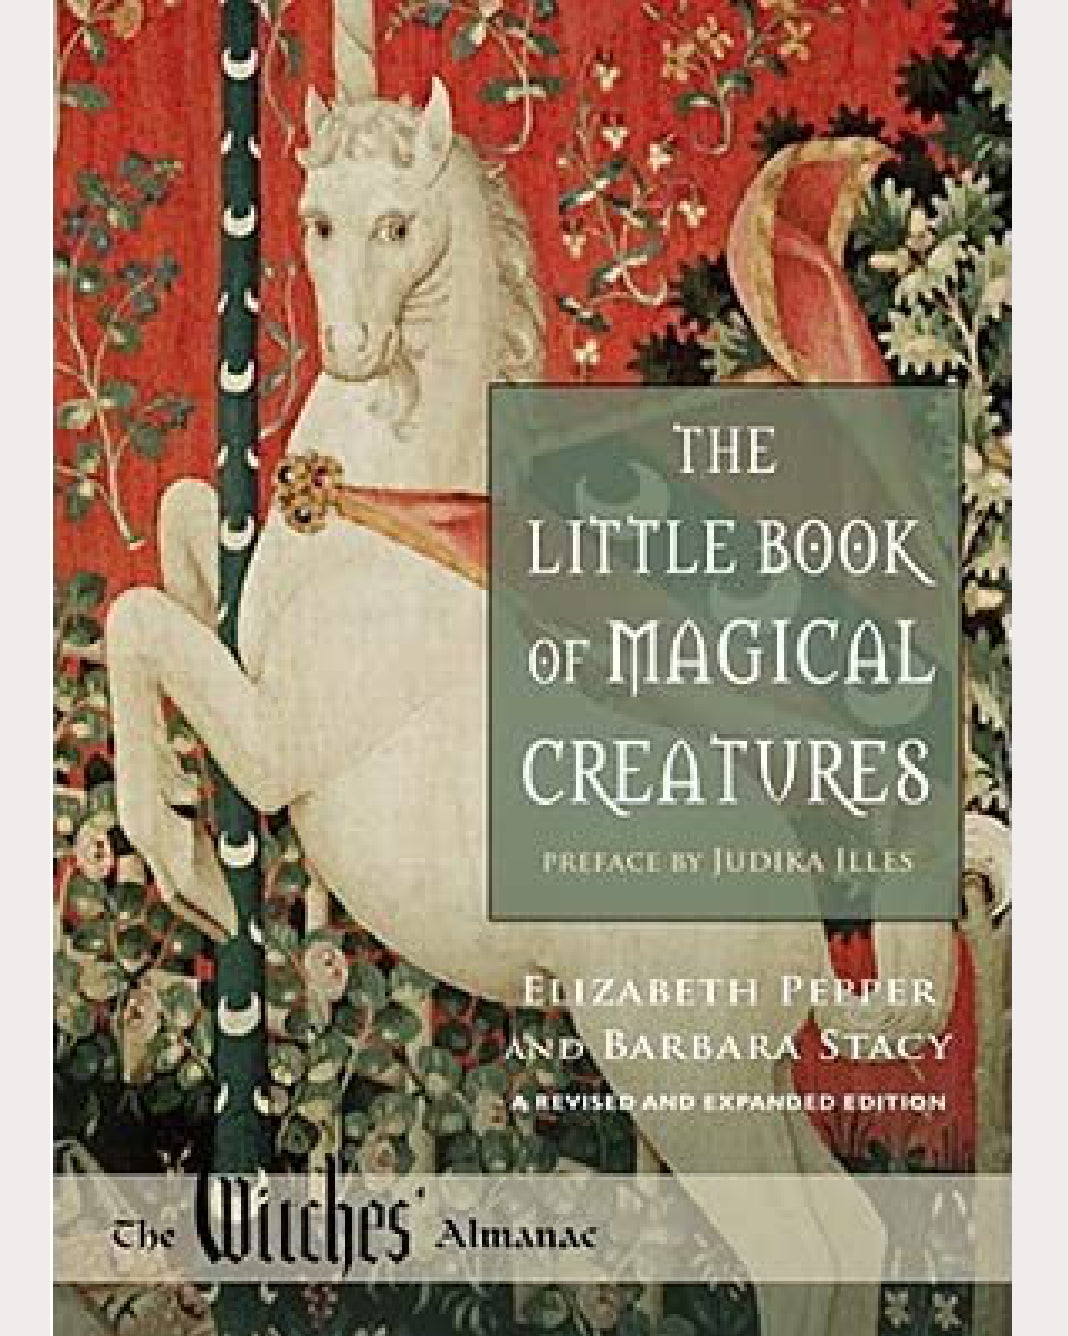 The Little Book of Magical Creatures